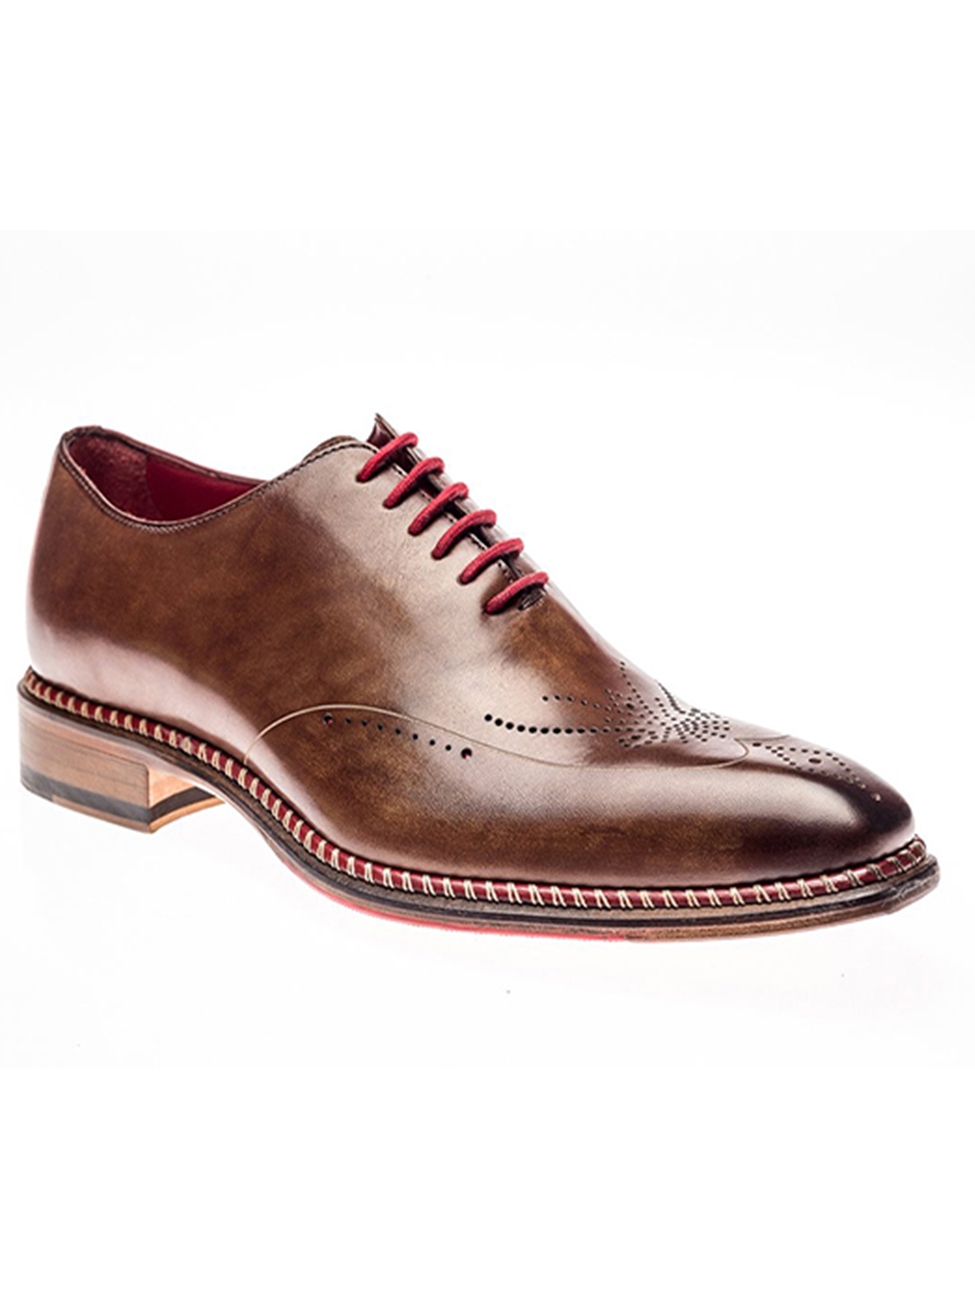 Cuoio Rosso Burnished Medallion Toe Veloce Oxford | Jose Real Shoes ...